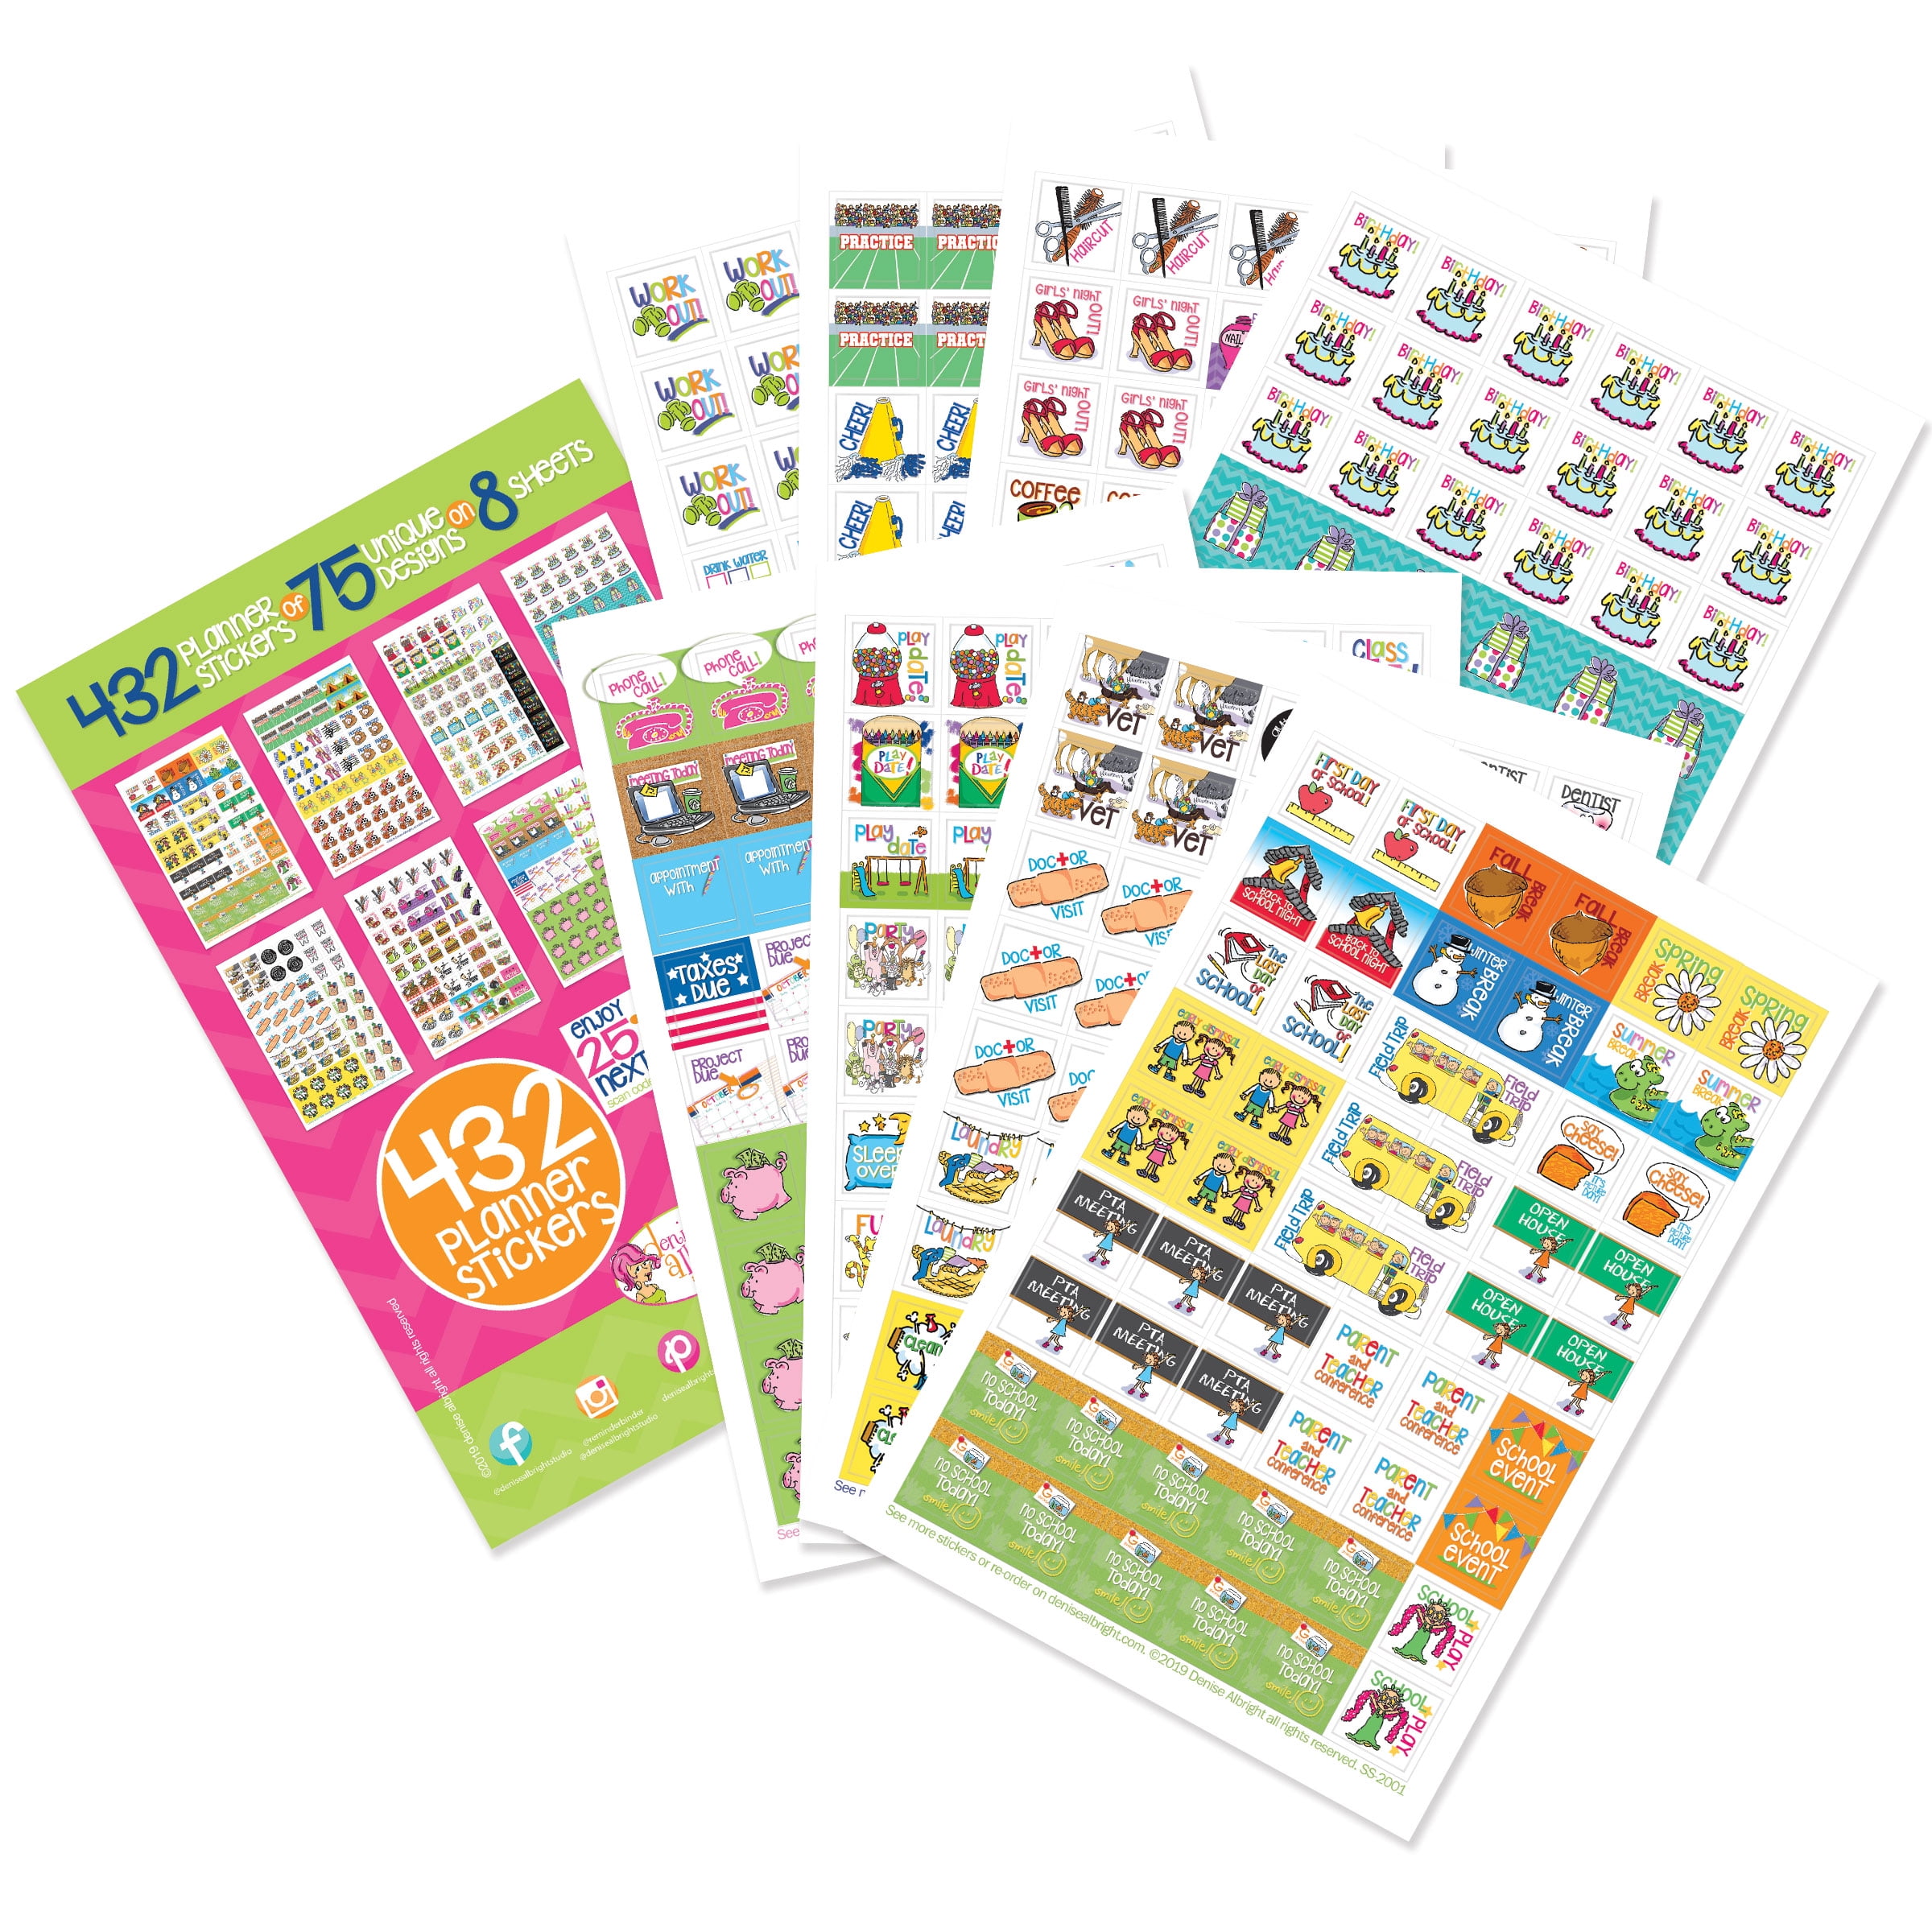 Tracker Stickers Hydration Crystals Planner Stickers Reminder Stickers Journal Stickers